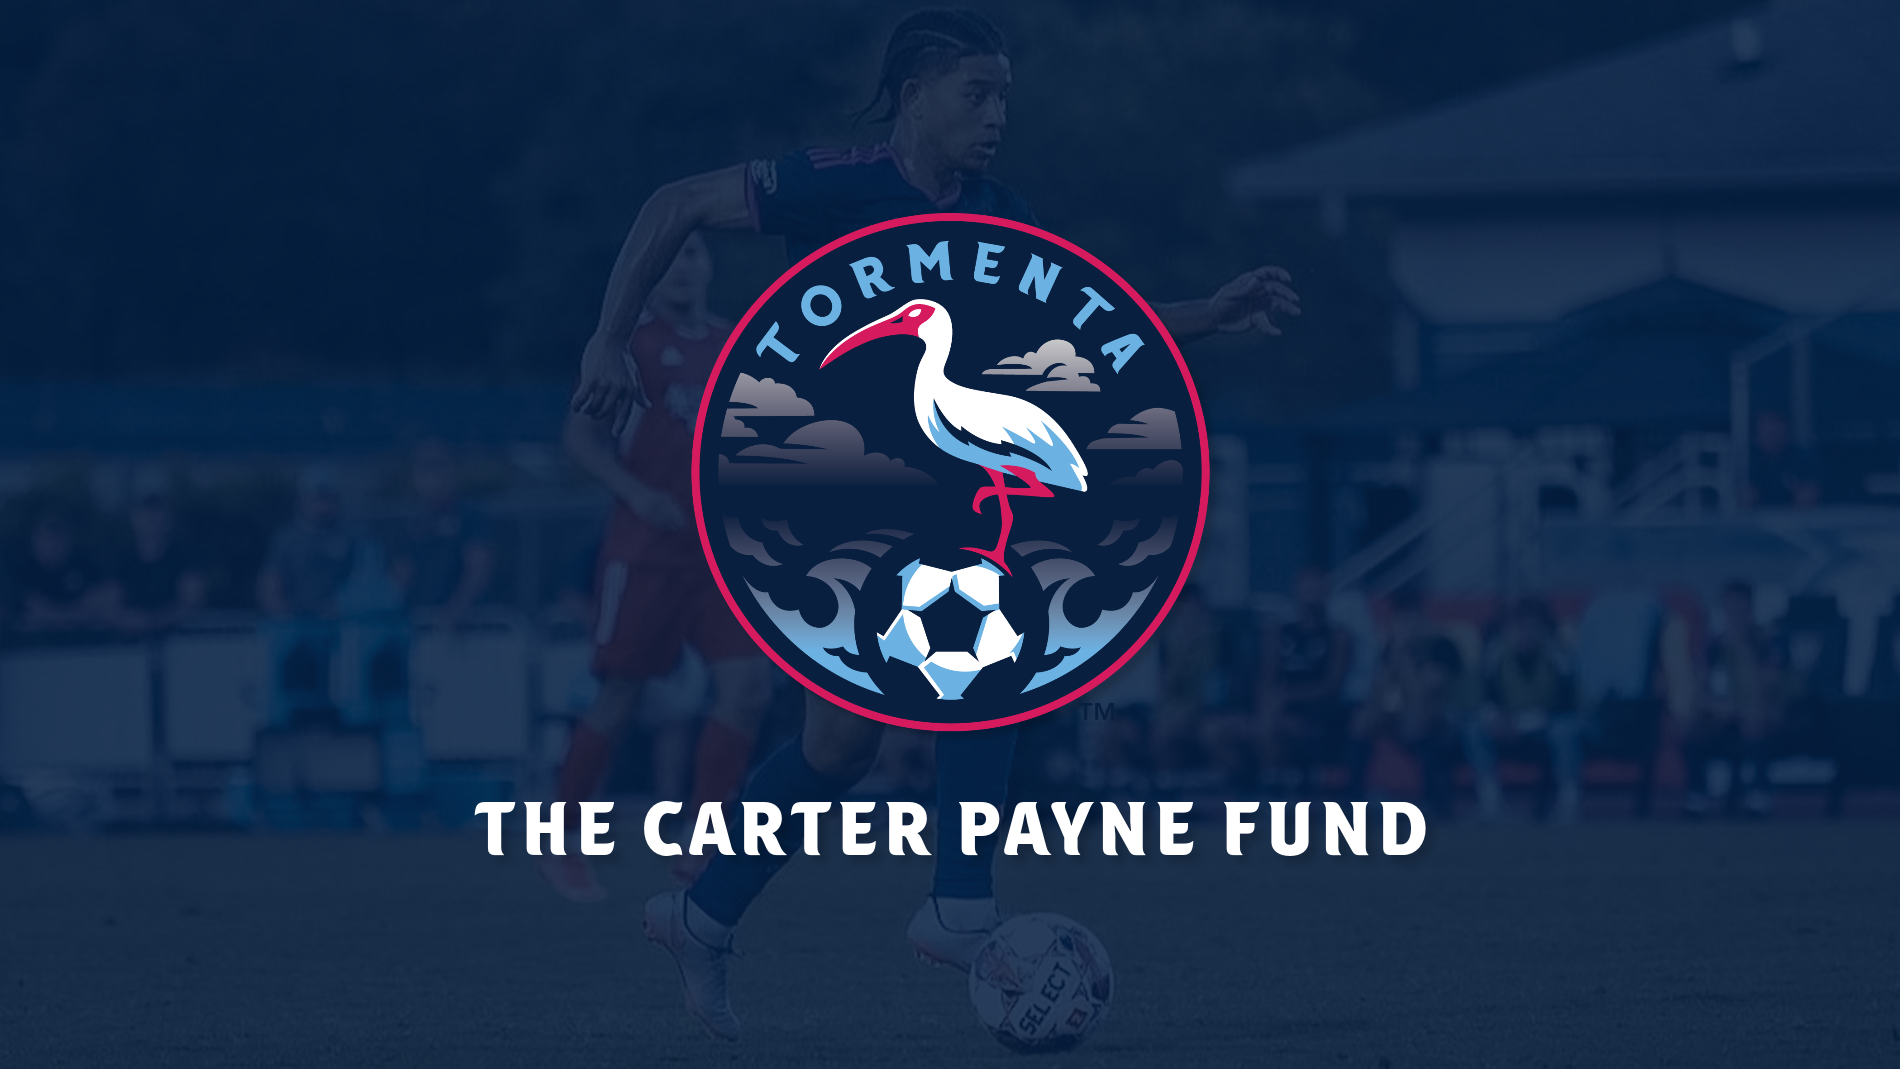 Tormenta FC, Ibis Foundation Create The Carter Payne Fund featured image